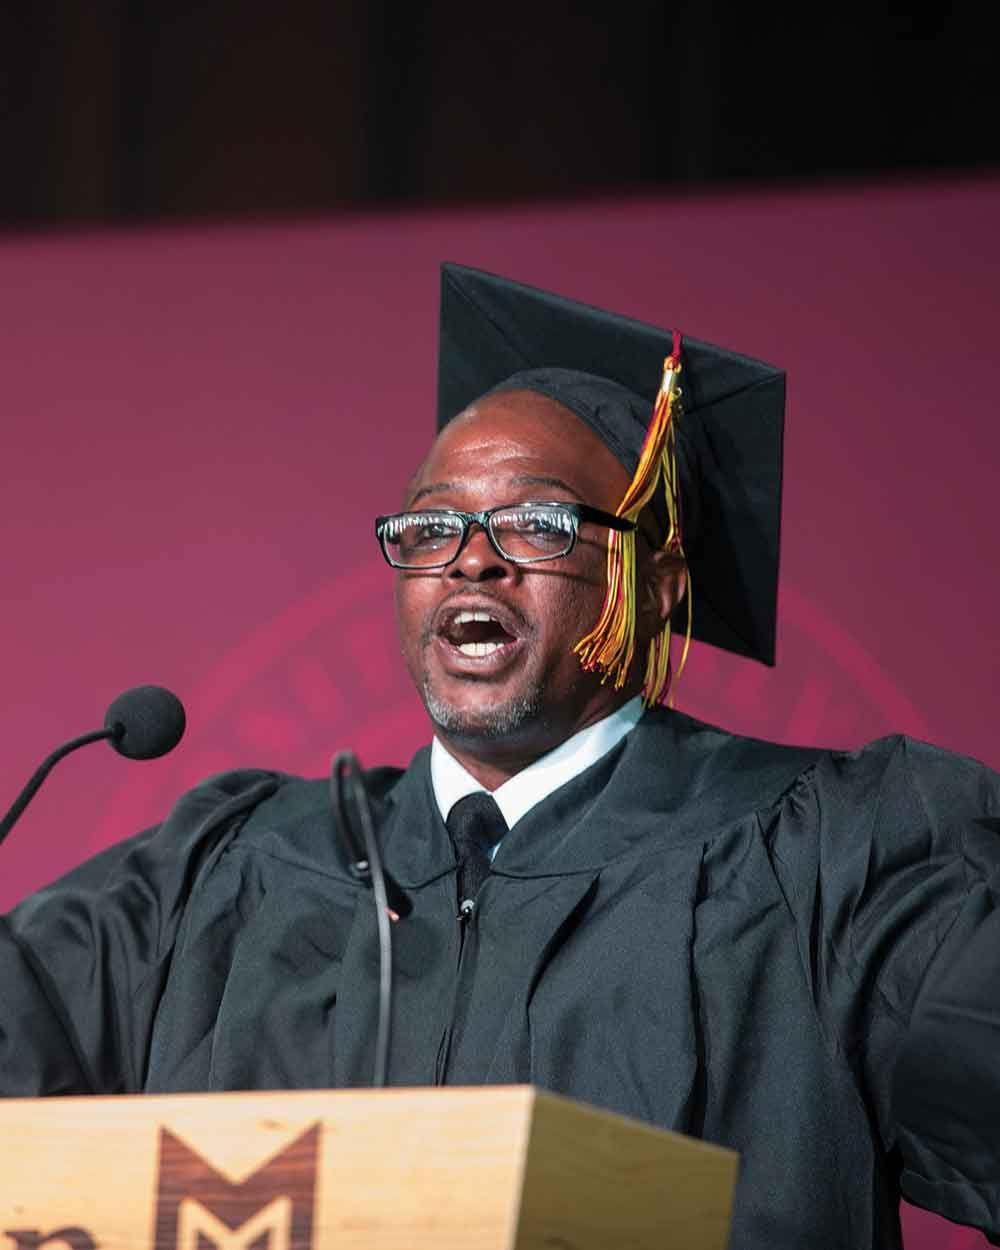 Patrick Campbell is a 2020 graduate of the Calvin Prison Initiative. He was the student speaker at the 2022 Commencement ceremony.